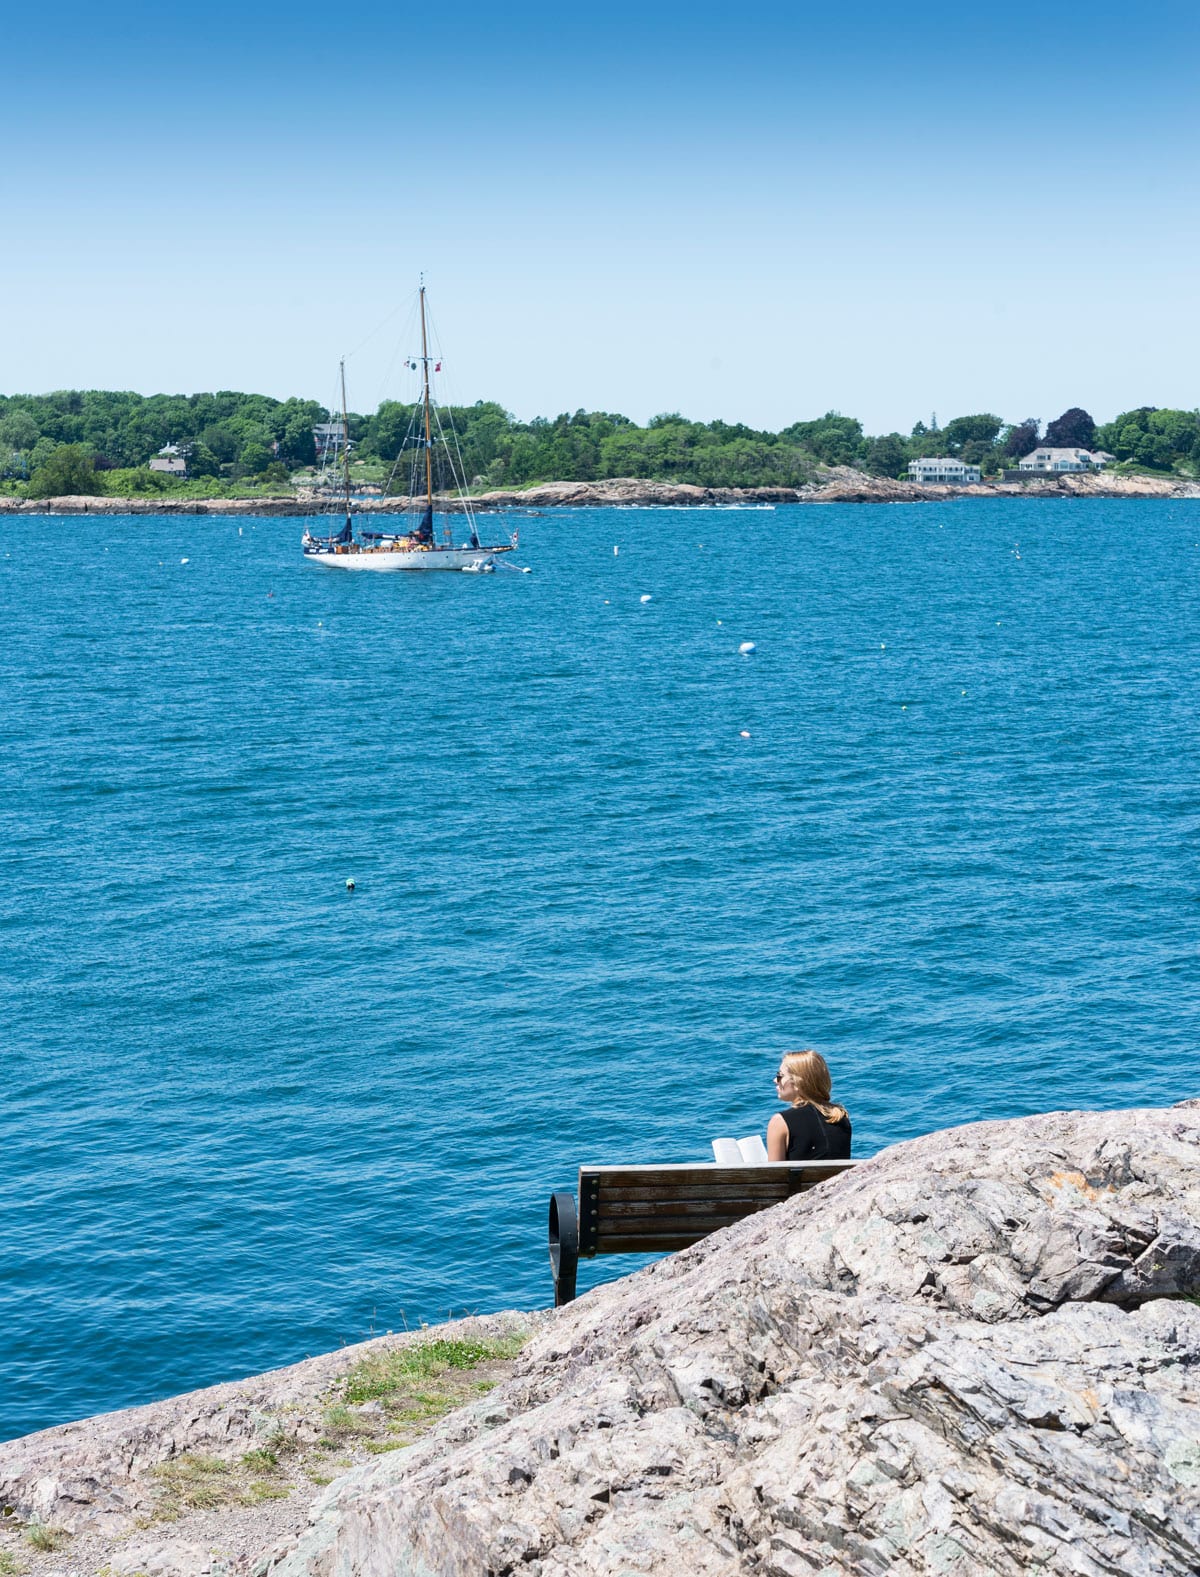 Naval Academy sailing squadron to visit Marblehead